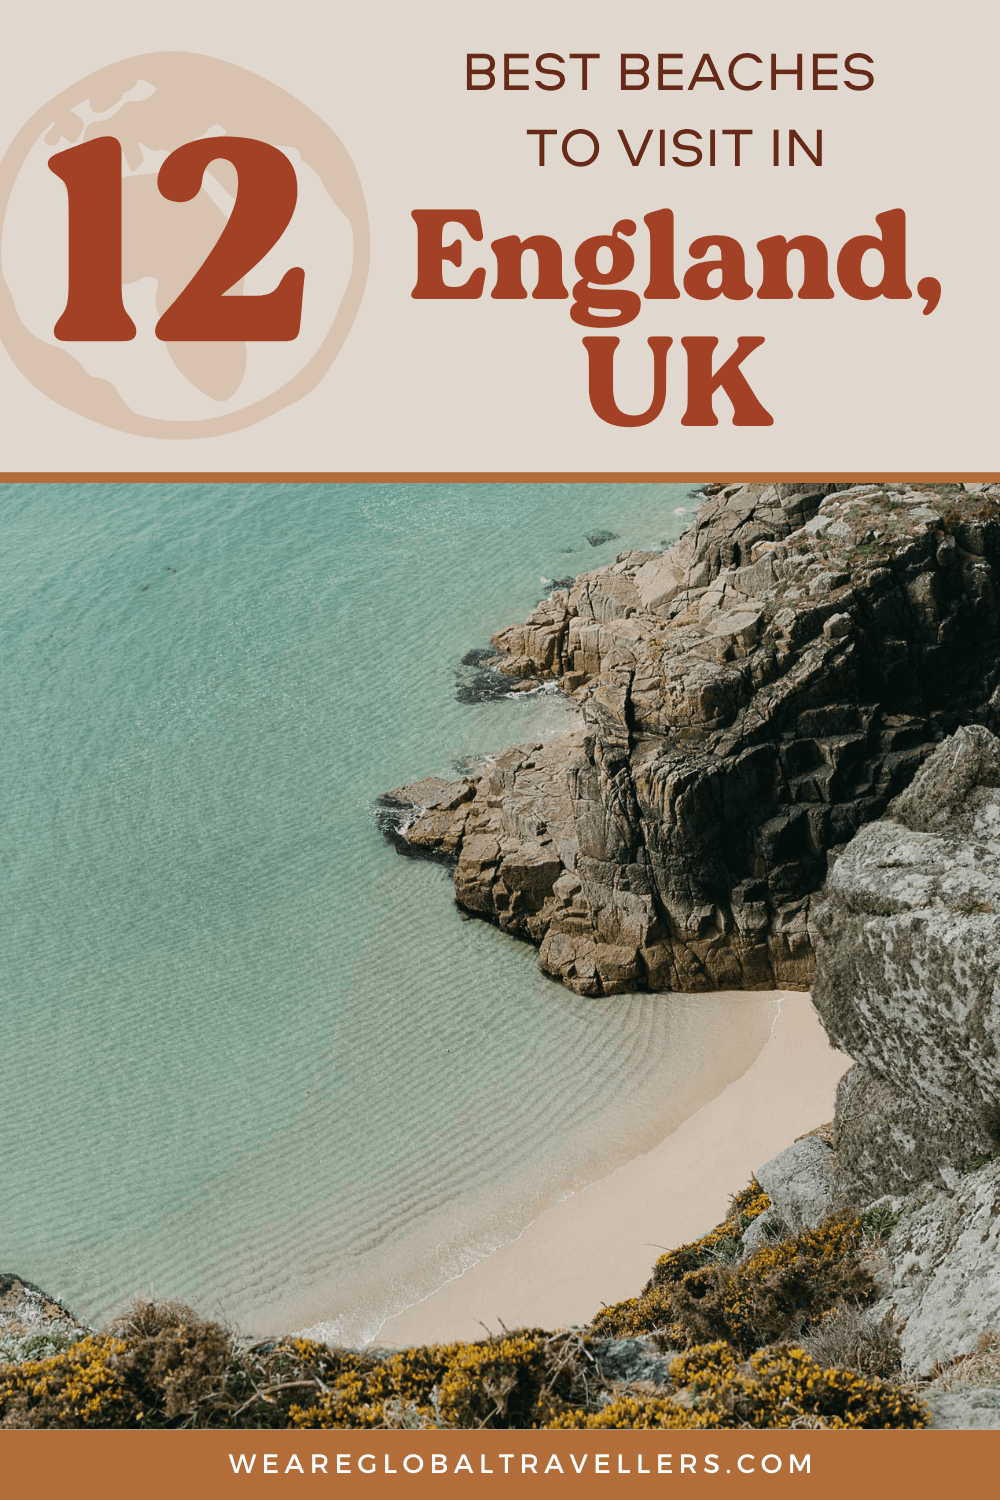 The Best Beaches to Visit in England